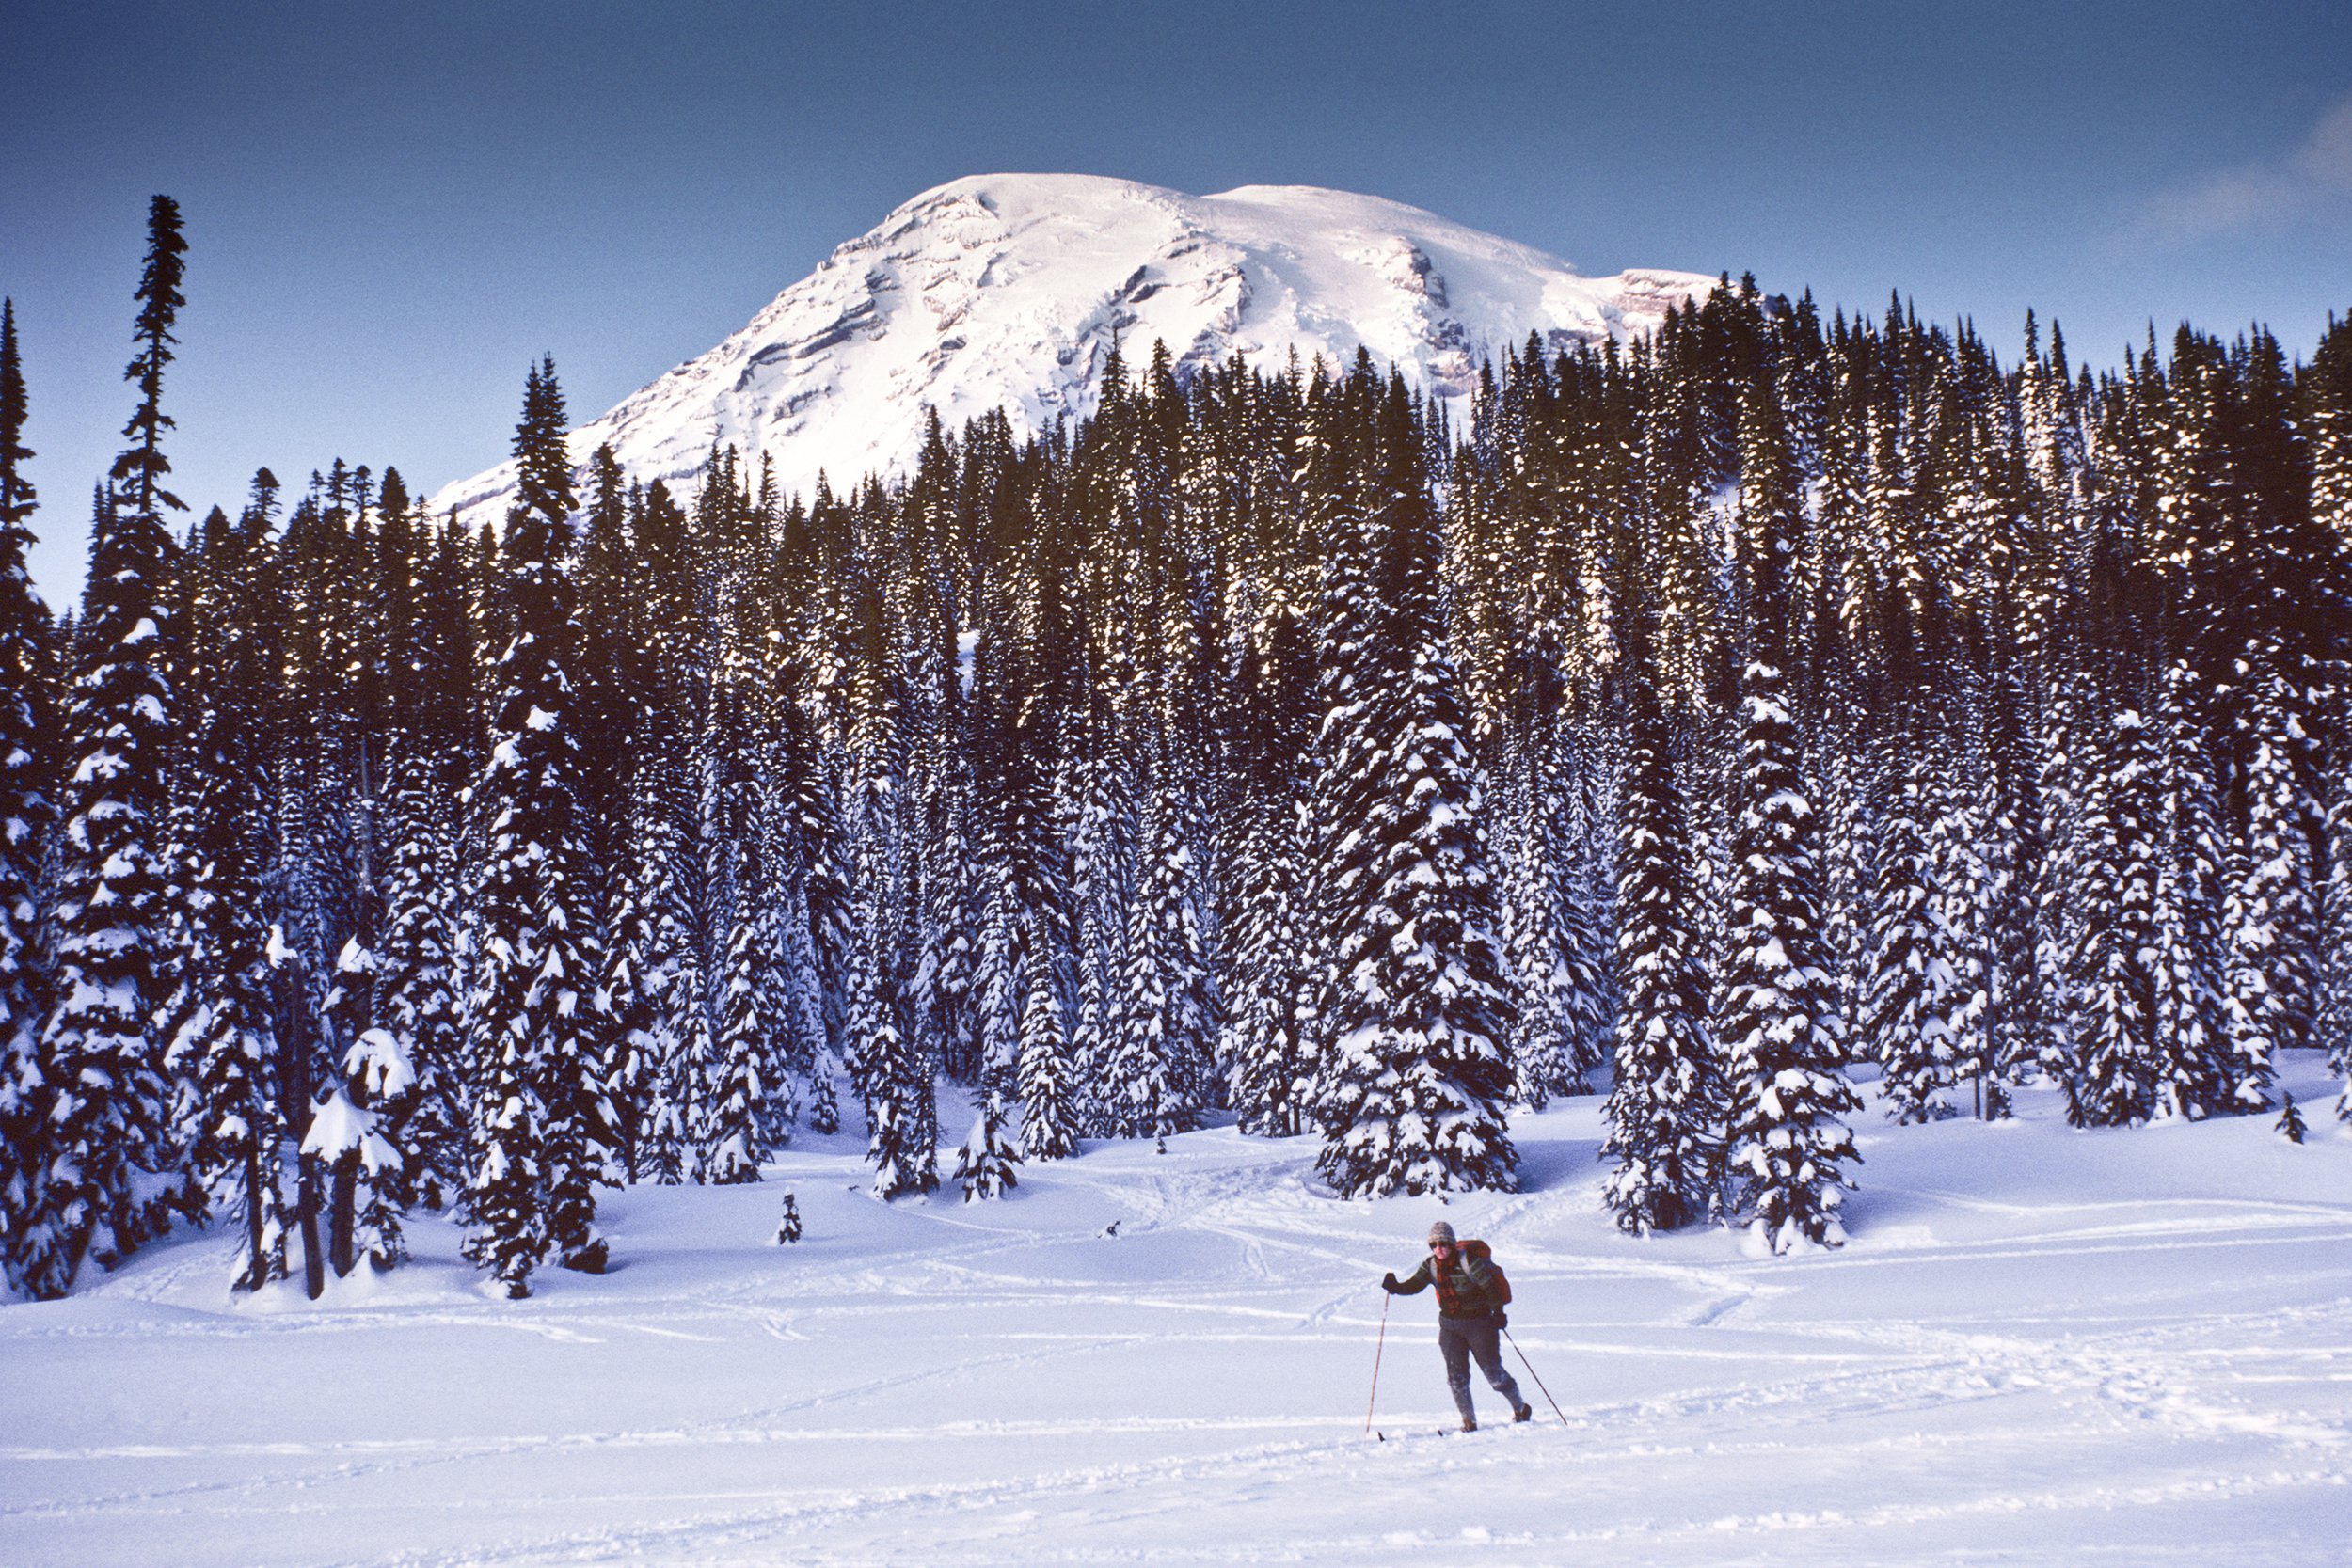 <p>With cold temperatures and heavy snowfall, winter usually hits <a href="https://www.nps.gov/mora/index.htm">Mount Rainier National Park</a> hard, often forcing roads to close. But if you come prepared, you can take advantage of the off-season with activities like winter camping, skiing, snowshoeing, and snowmobiling. If the weather's nice enough, consider hiking or biking Carbon River Road, which was closed to motor-vehicle traffic due to flooding in 2006.</p><br><p><b>Related:</b> <a href="https://blog.cheapism.com/safe-road-trips/">50 Picturesque Road Trips for Safer Travel During the Pandemic</a></p>